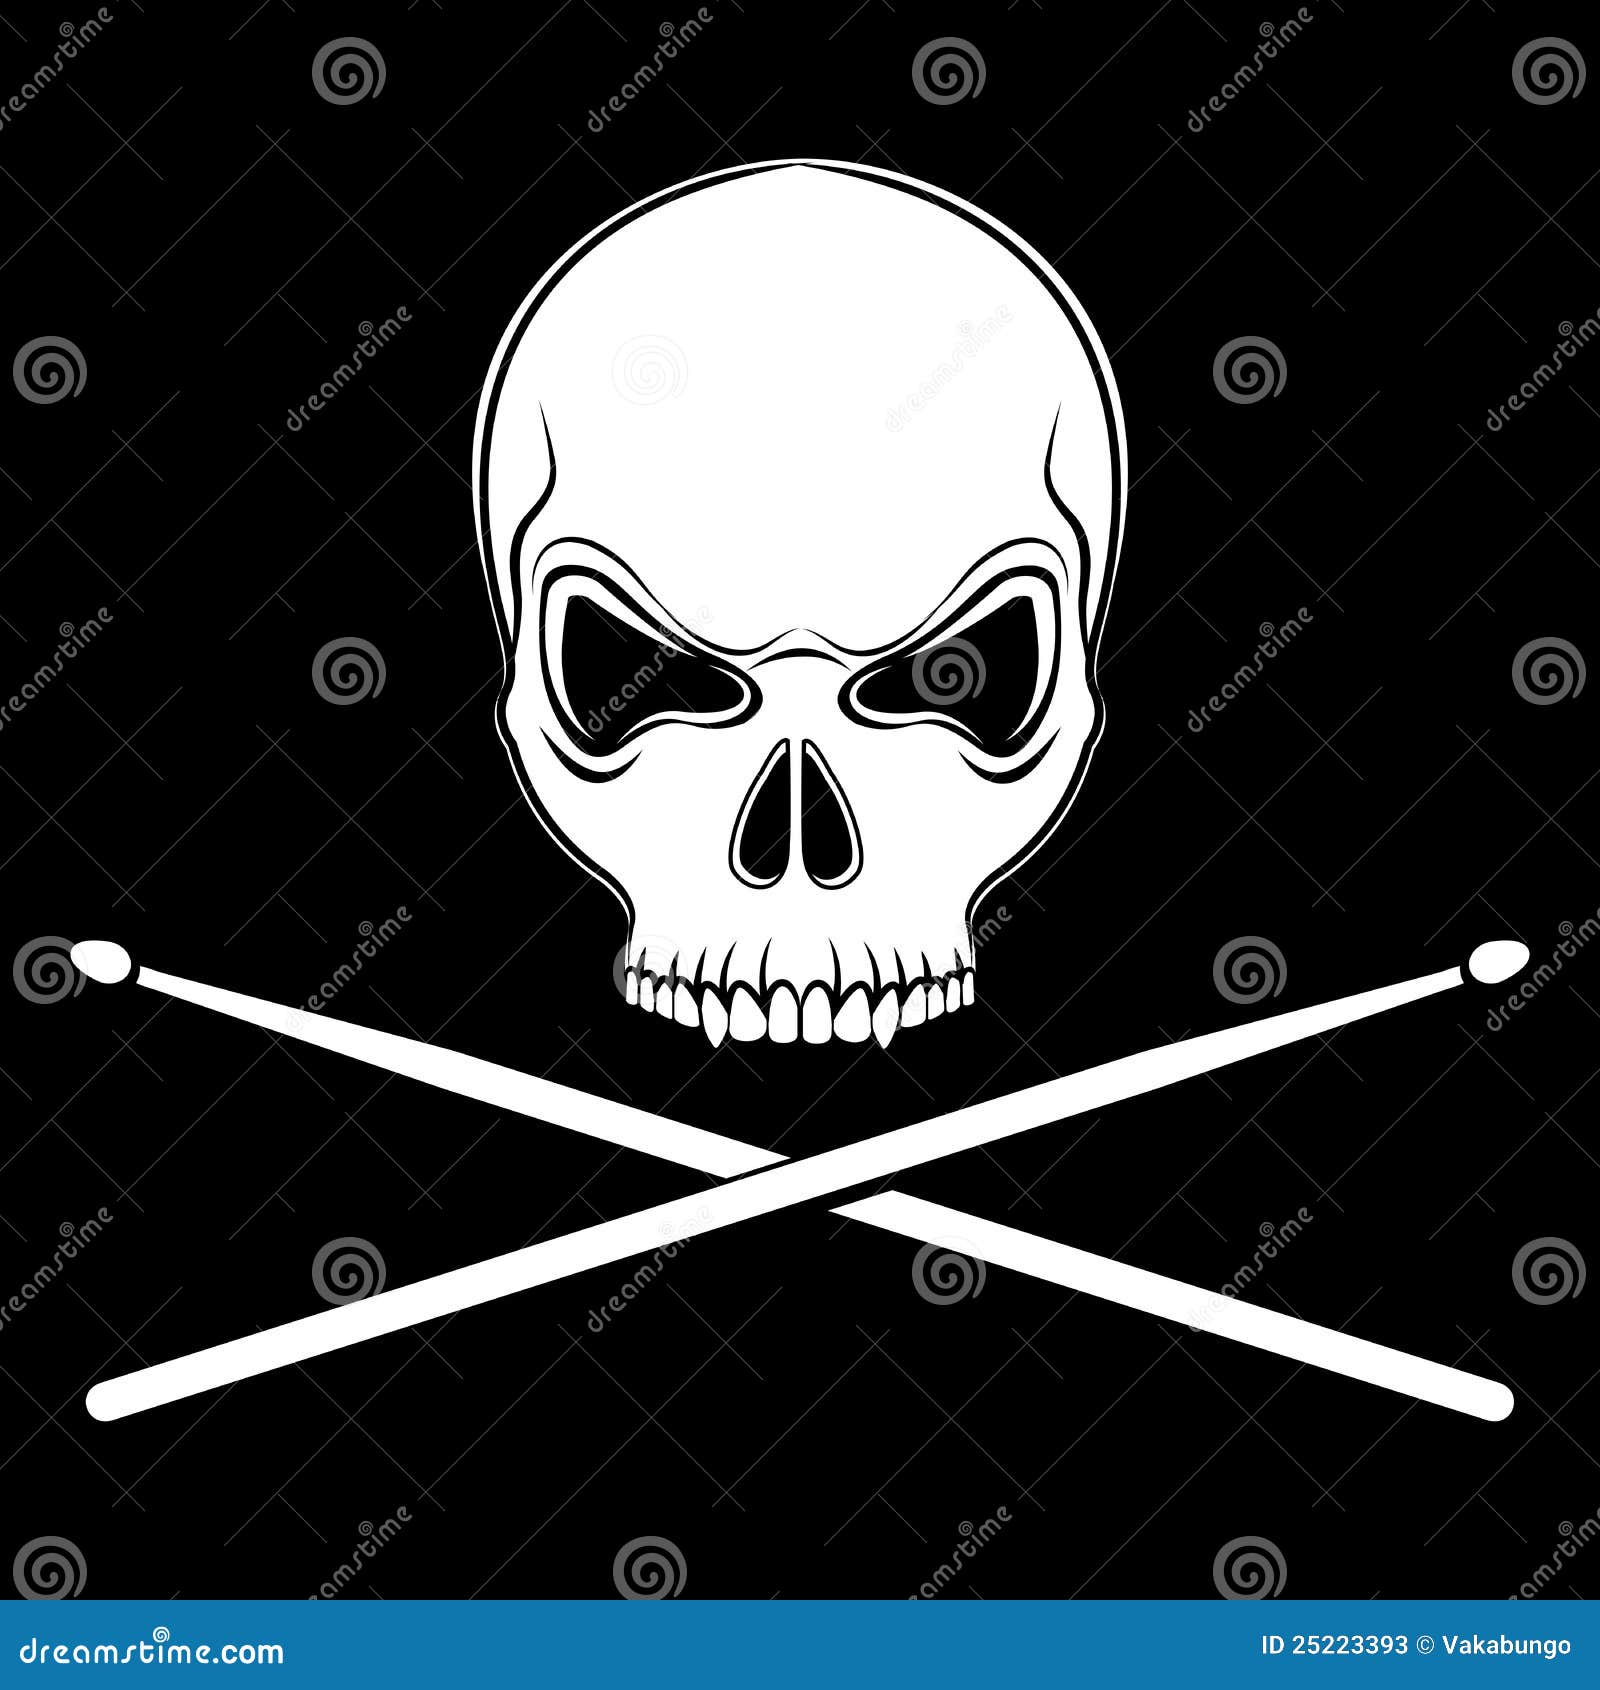 Vector Jolly Roger Skull With Drumsticks Stock Photos - Image: 25223393